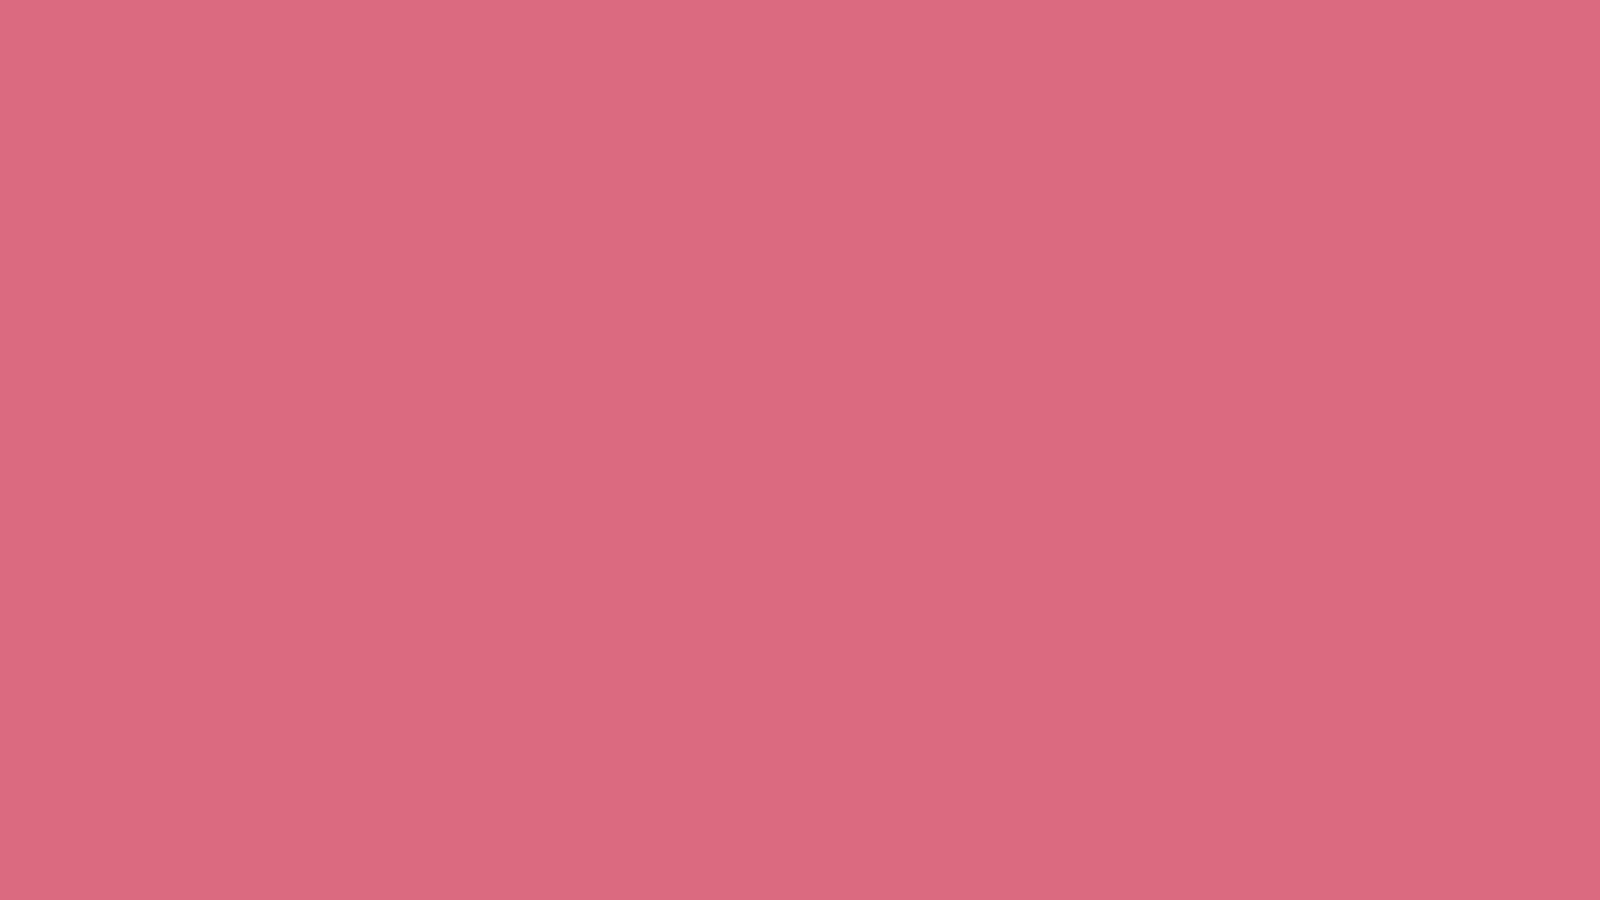 db6a80_solid_color_background_icolorpalette.png